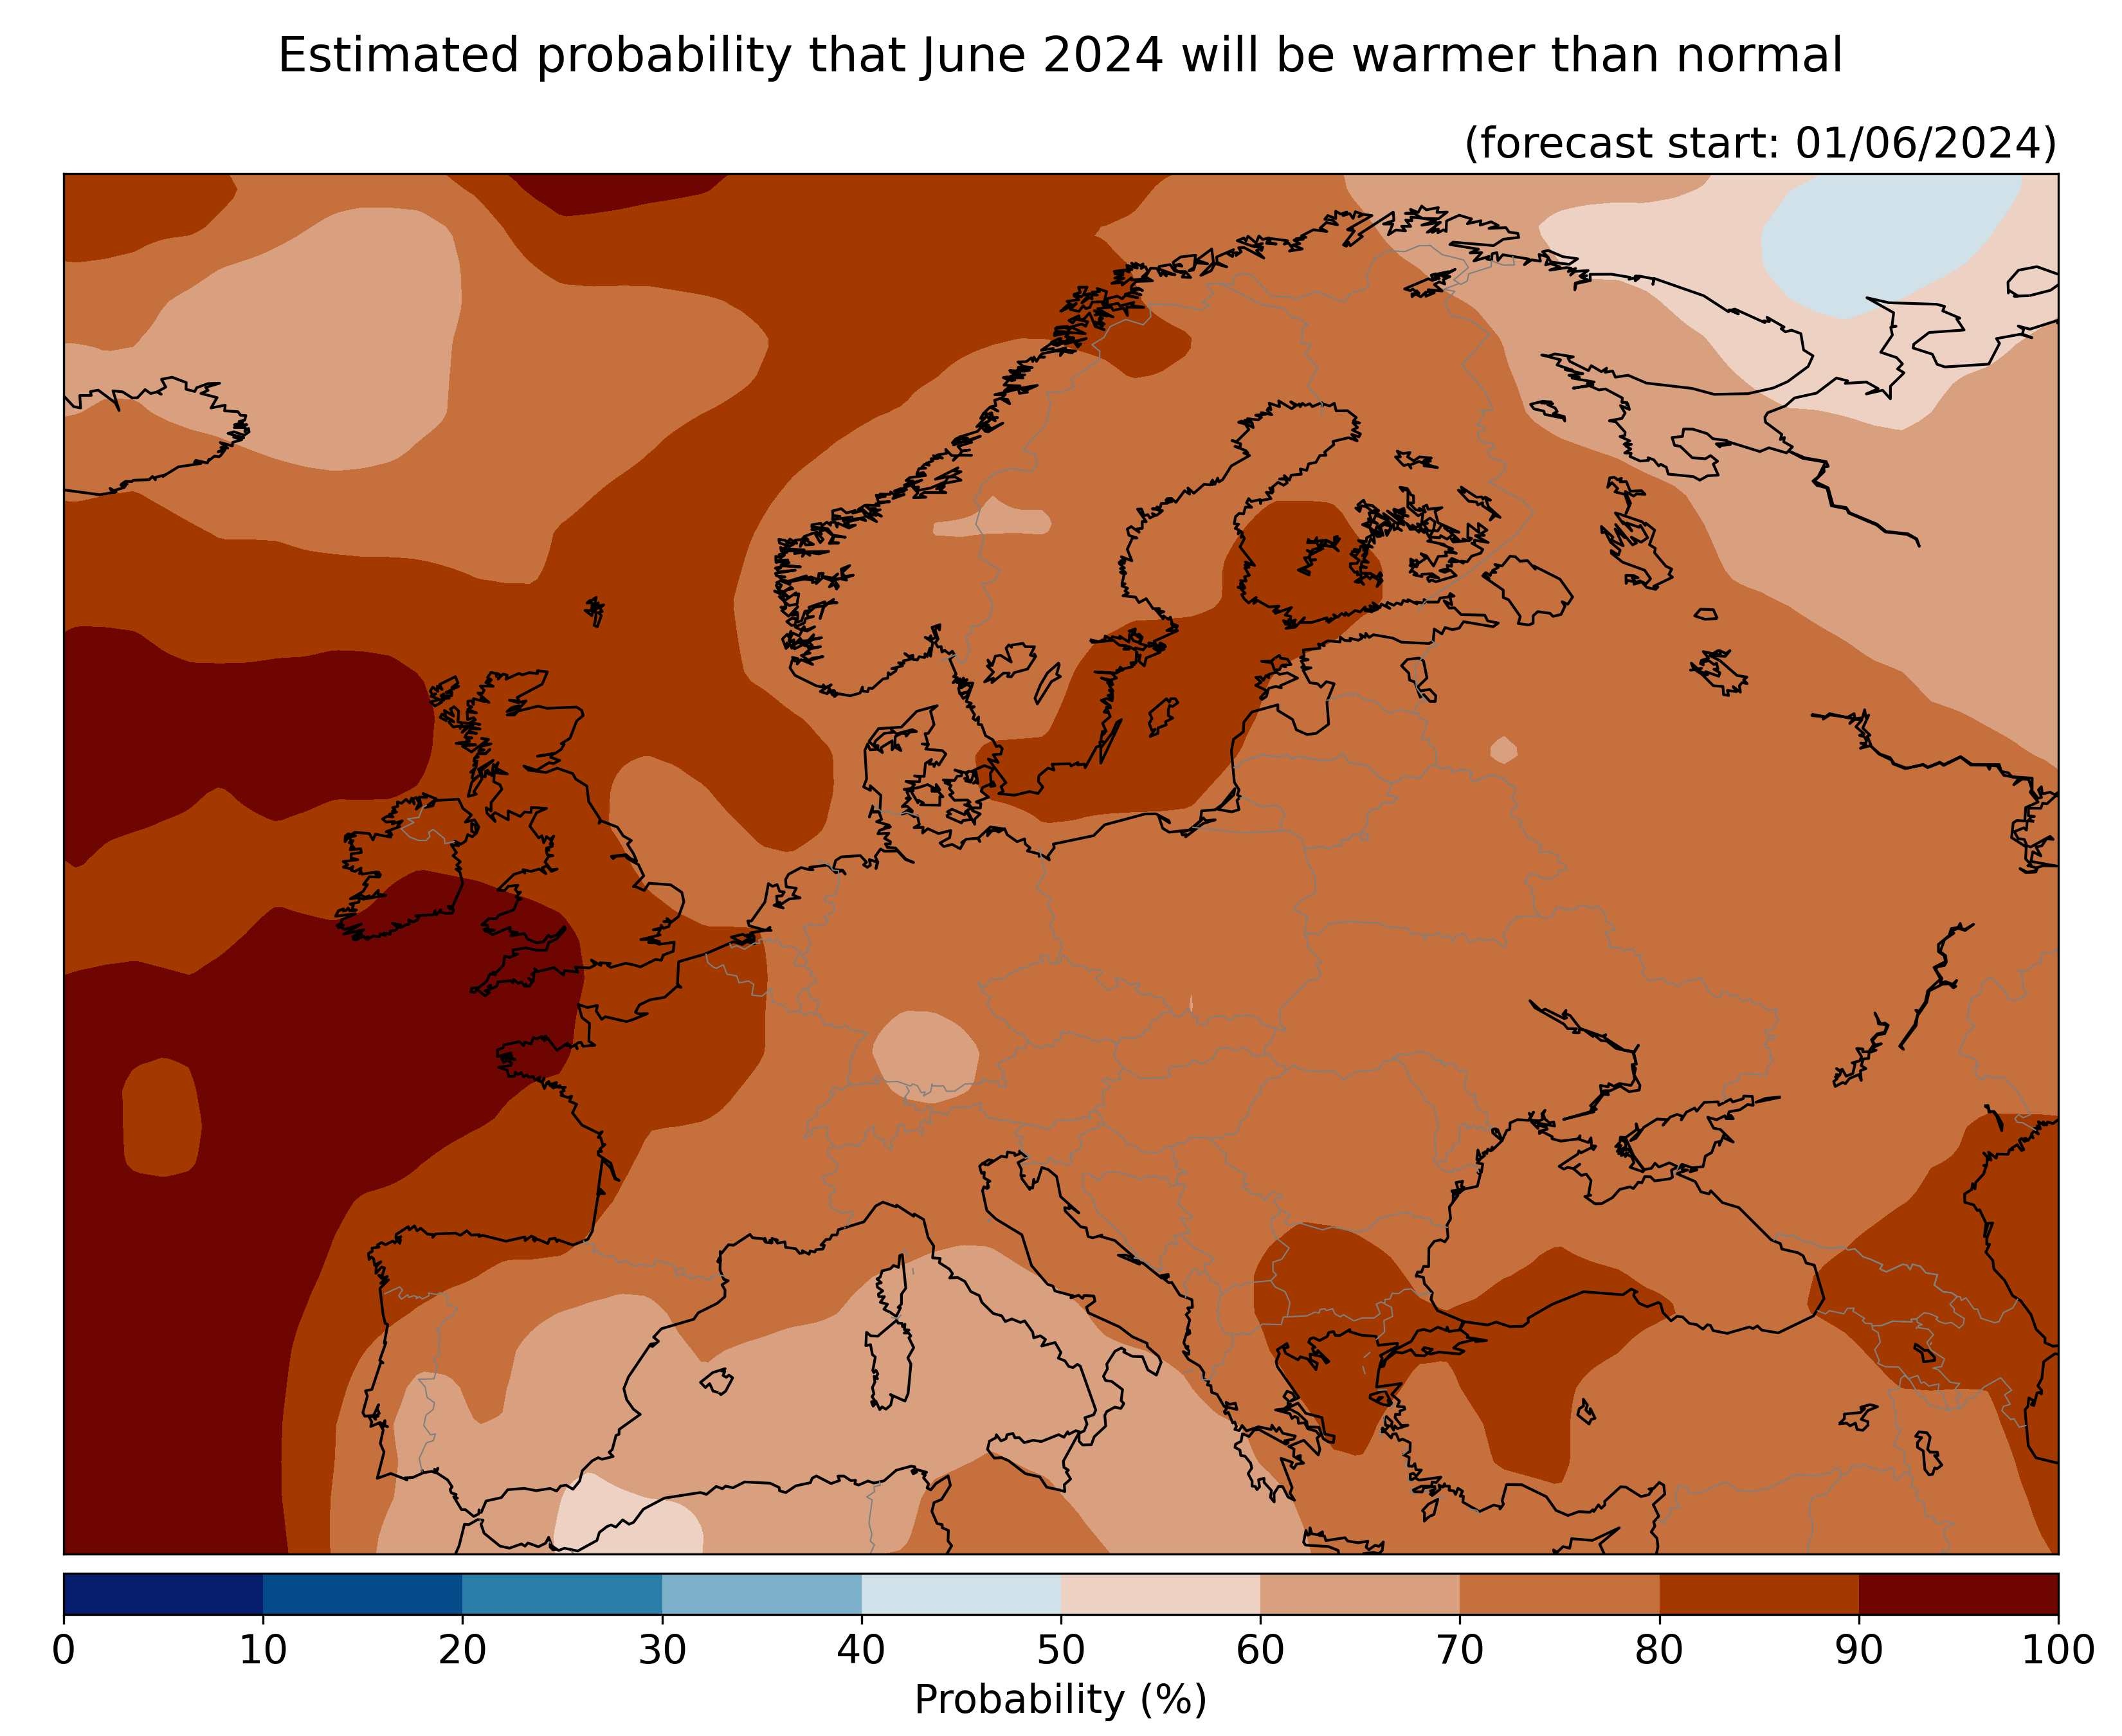 Estimated probability that June 2024 will be warmer that normal, relative to the 1993–2016